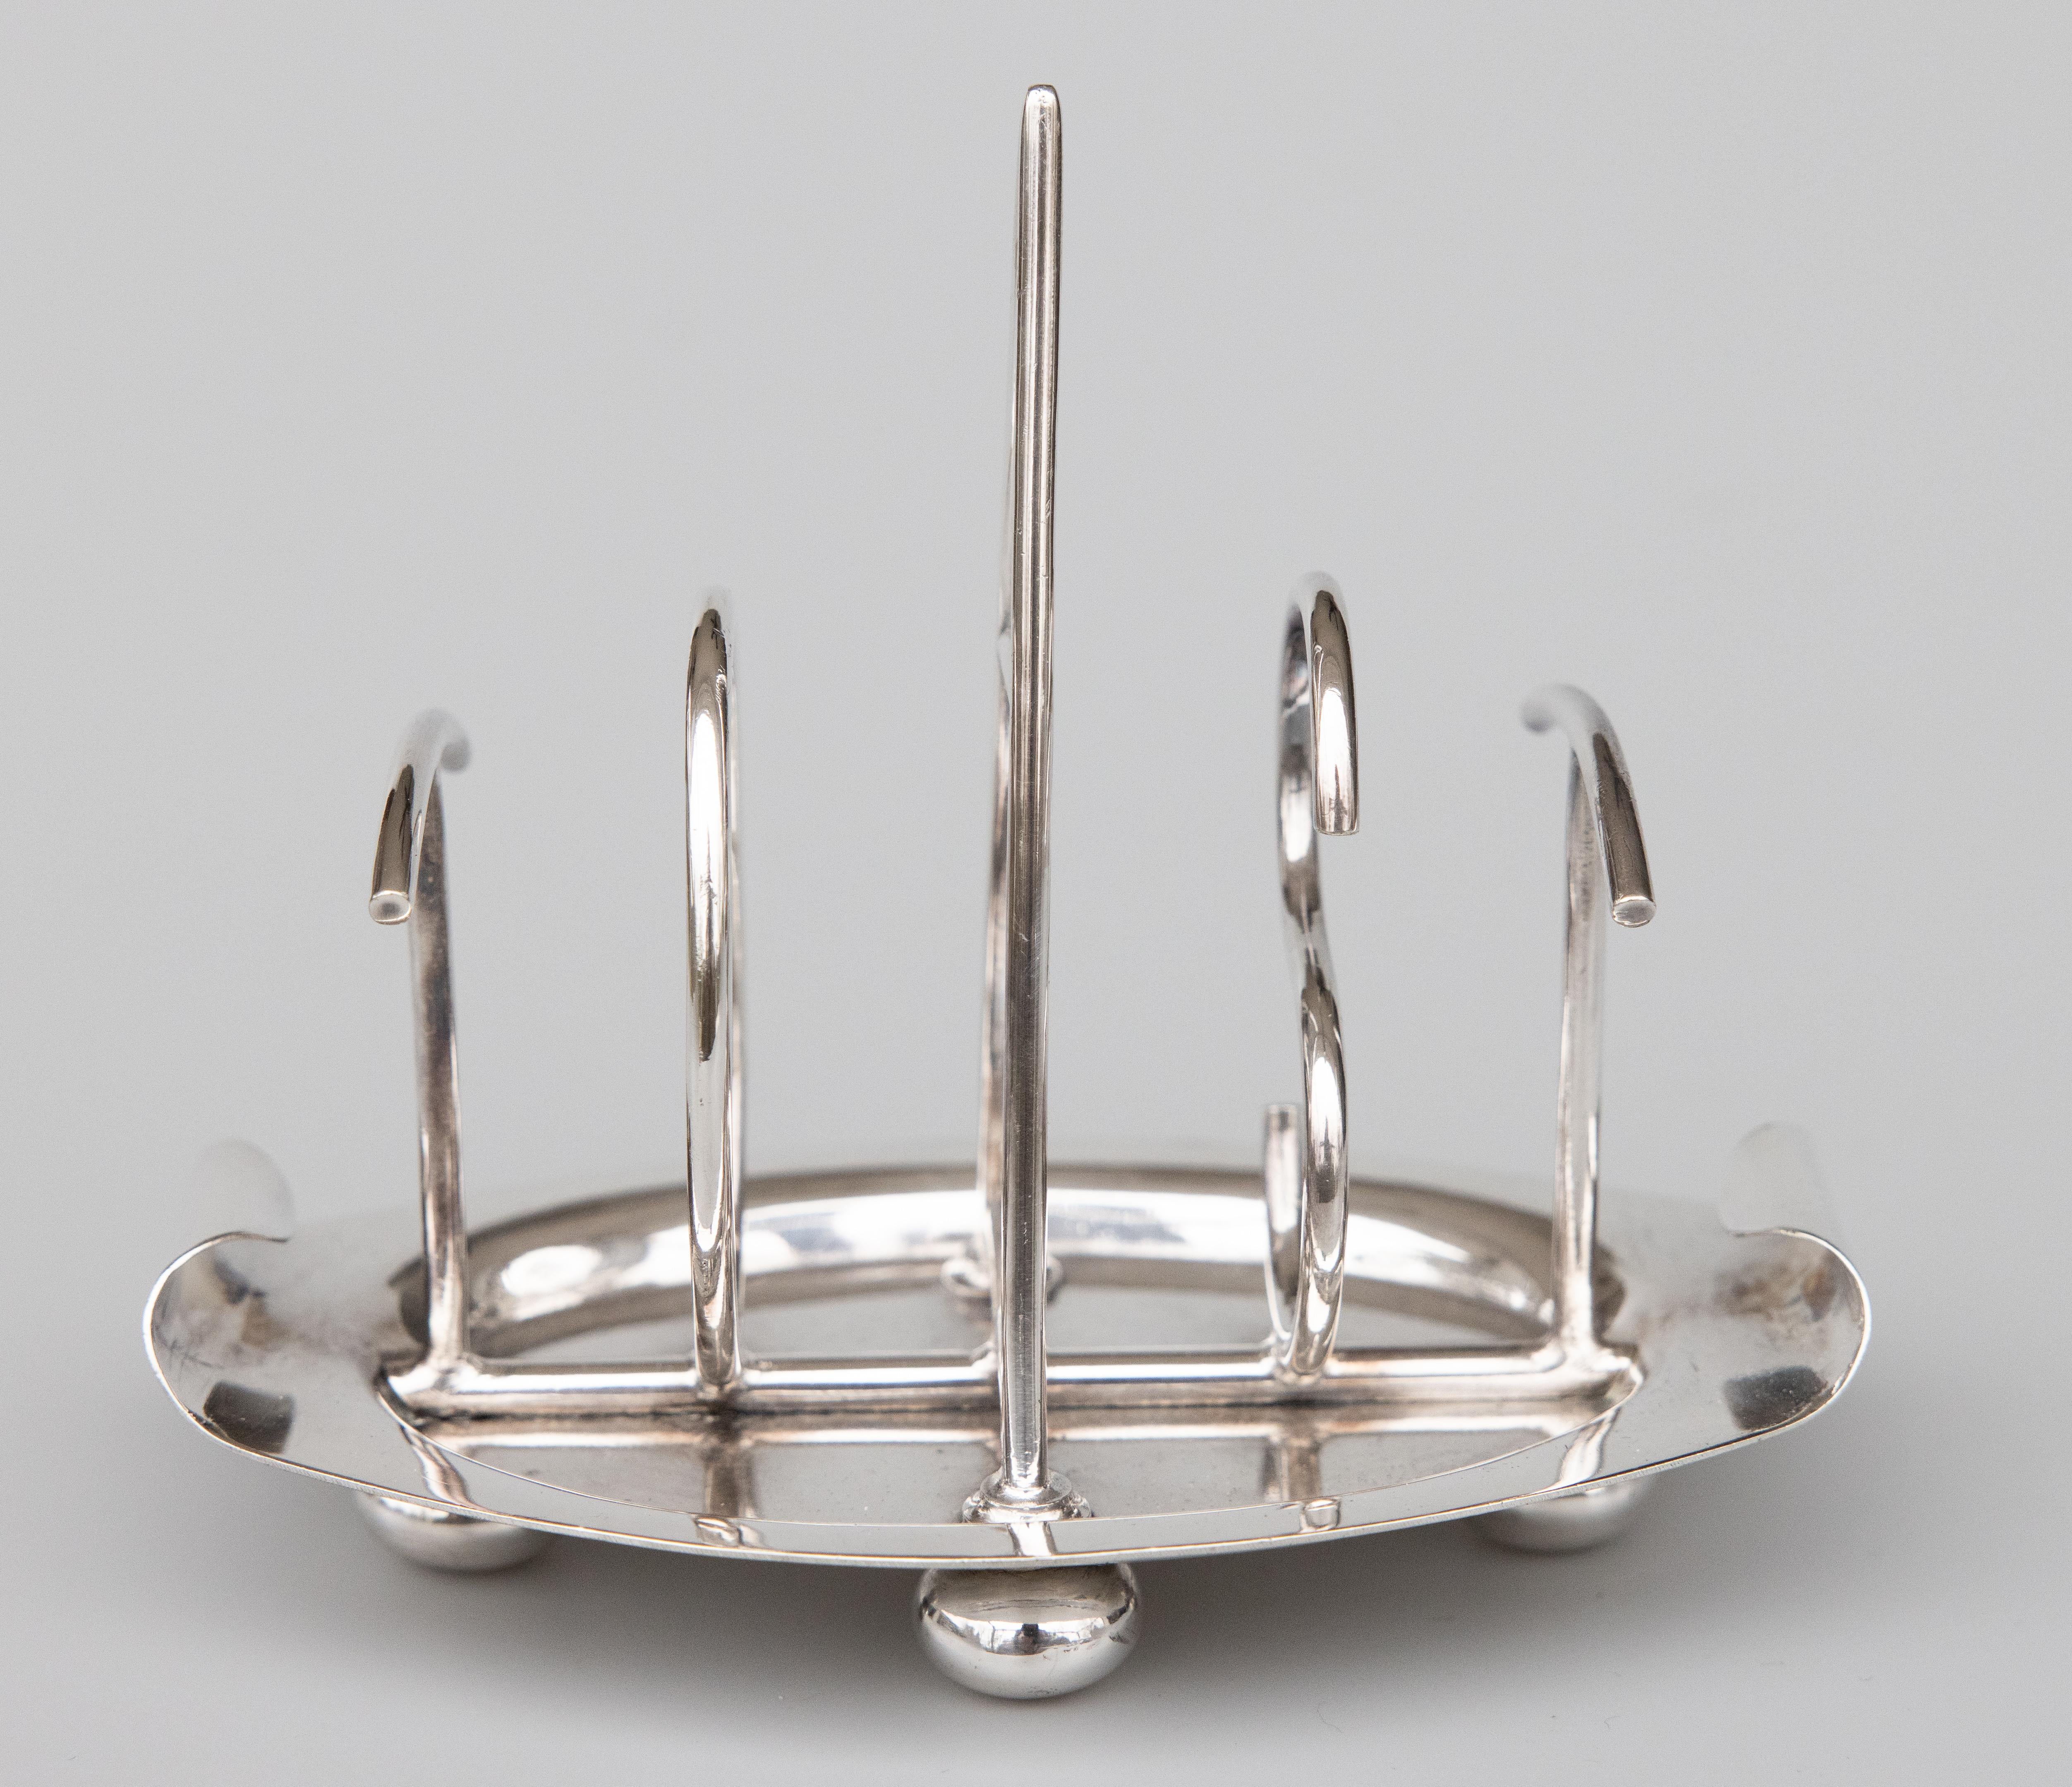 A superb antique English silverplated four slice toast rack made by Walker & Hall of Sheffield, England, dated 1903. Maker's mark on reverse. This Fine quality silver toast rack is well made with a lovely Art Deco design shaped in the word 